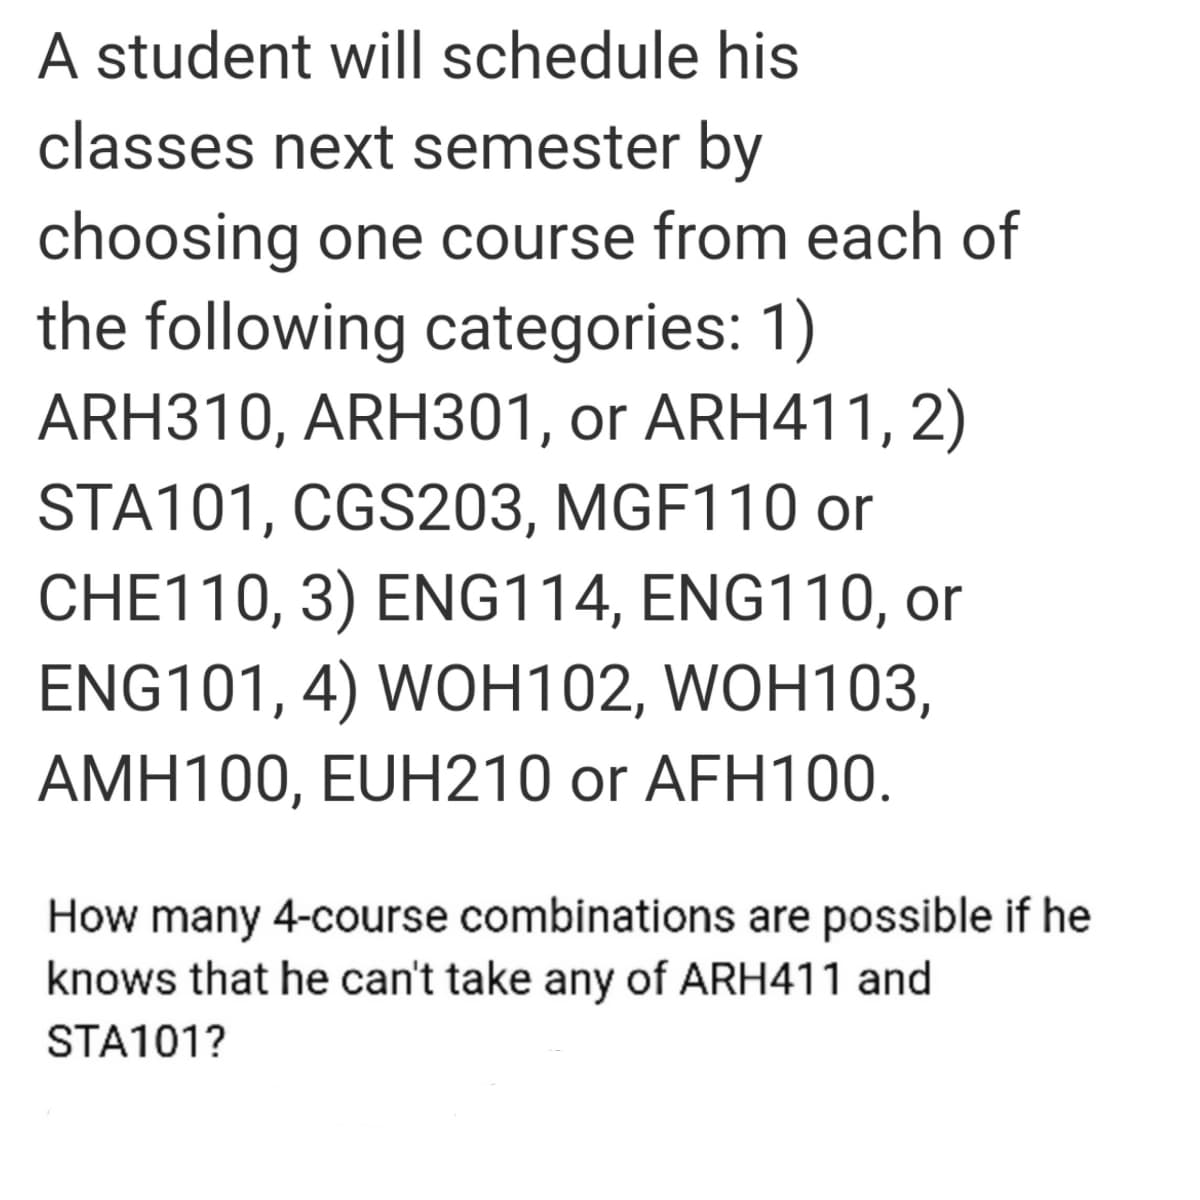 A student will schedule his
classes next semester by
choosing one course from each of
the following categories: 1)
ARH310, ARH301, or ARH411, 2)
STA101, CGS203, MGF110 or
CHE110, 3) ENG114, ENG110, or
ENG101, 4) WOH102, WOH103,
AMH100, EUH210 or AFH100.
How many 4-course combinations are possible if he
knows that he can't take any of ARH411 and
STA101?
